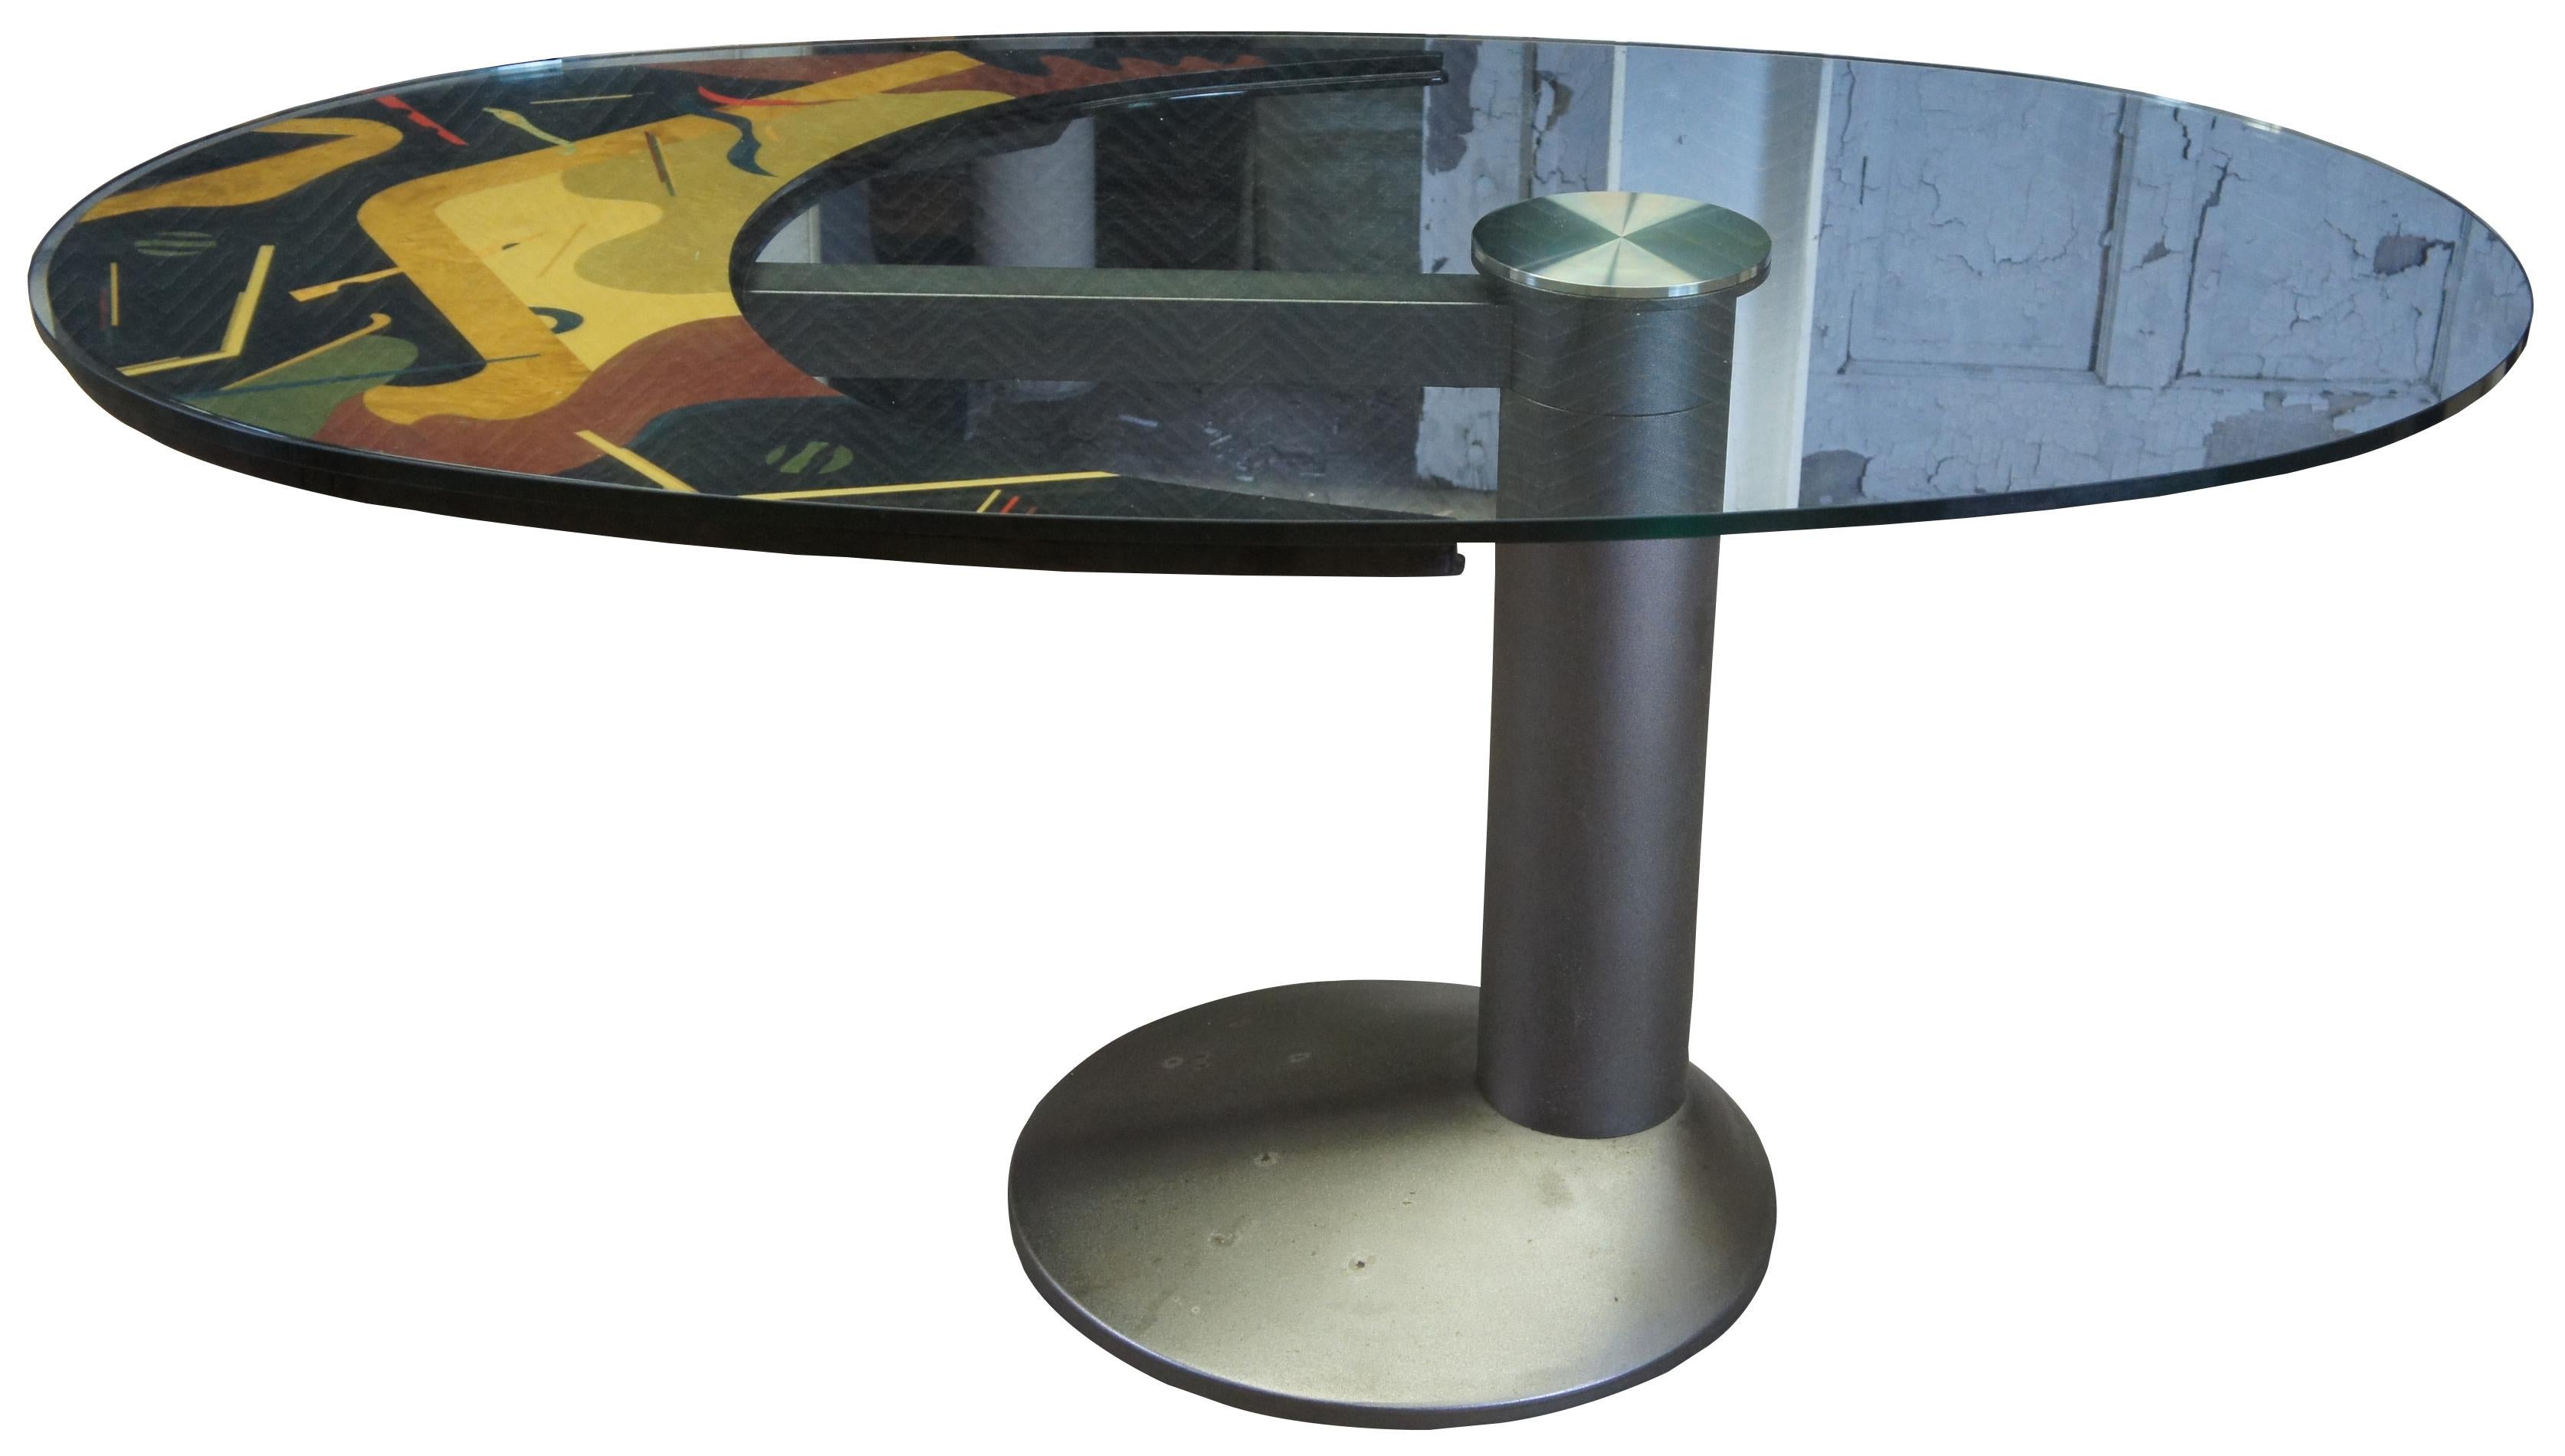 Bauhaus Post Modern Roche Bobois Glass Boomerang Rotating Oval Dining Table Contemporary